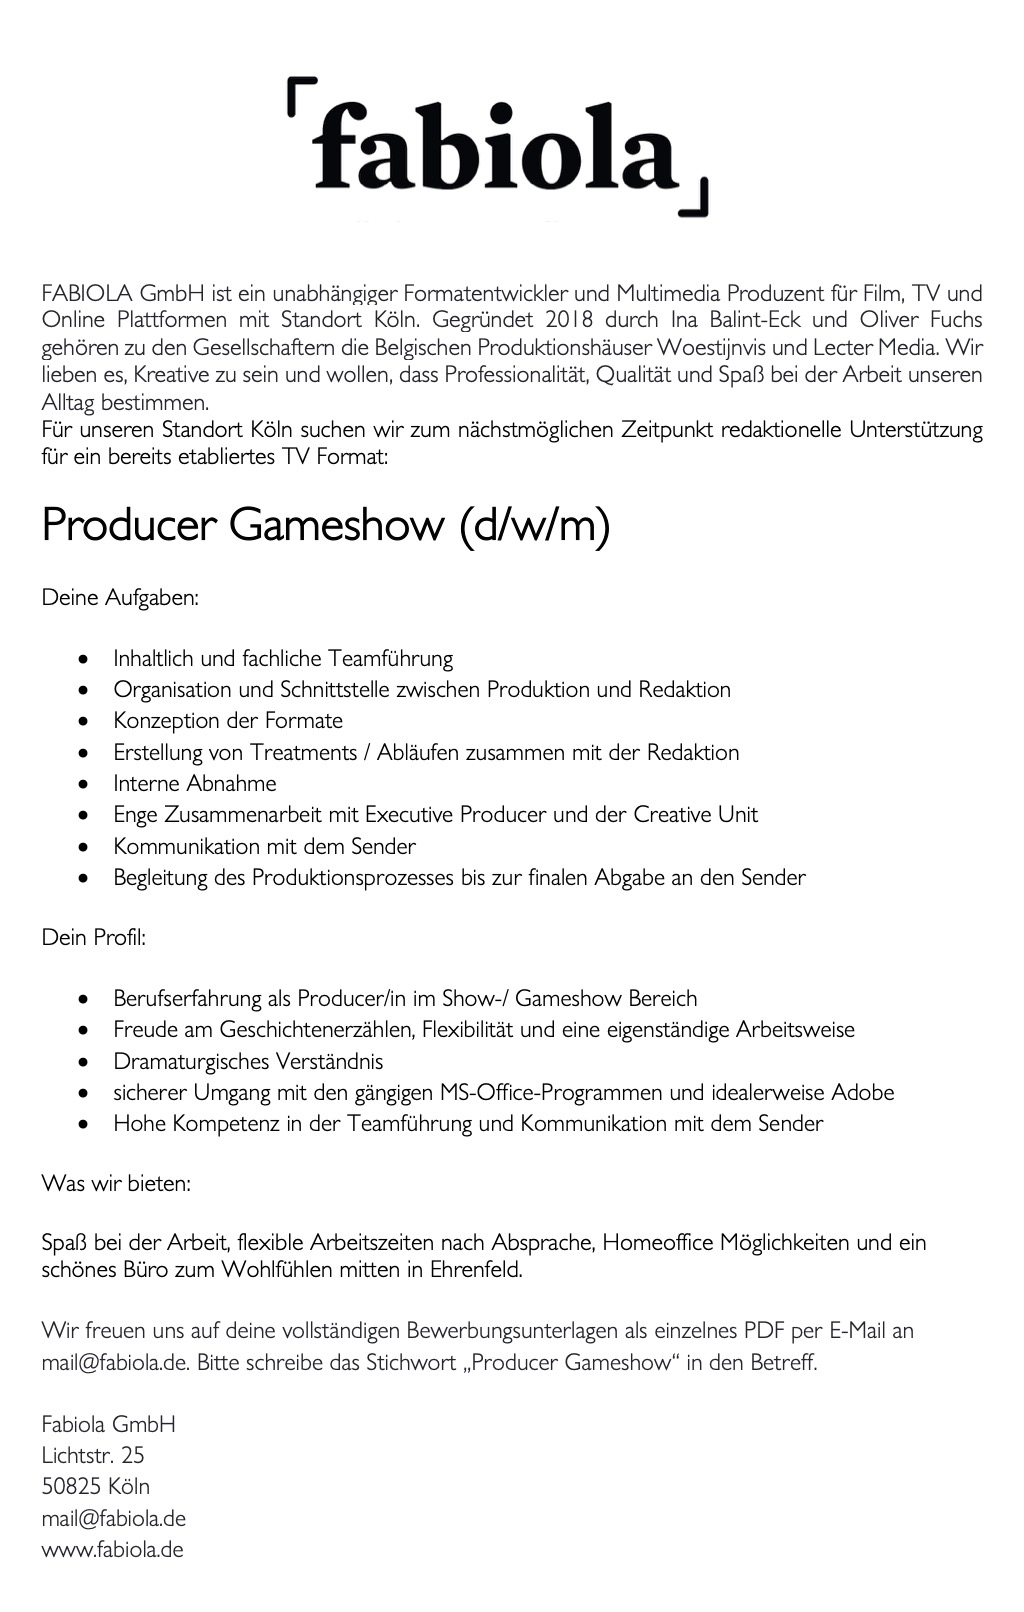 Producer Gameshow (d/w/m)